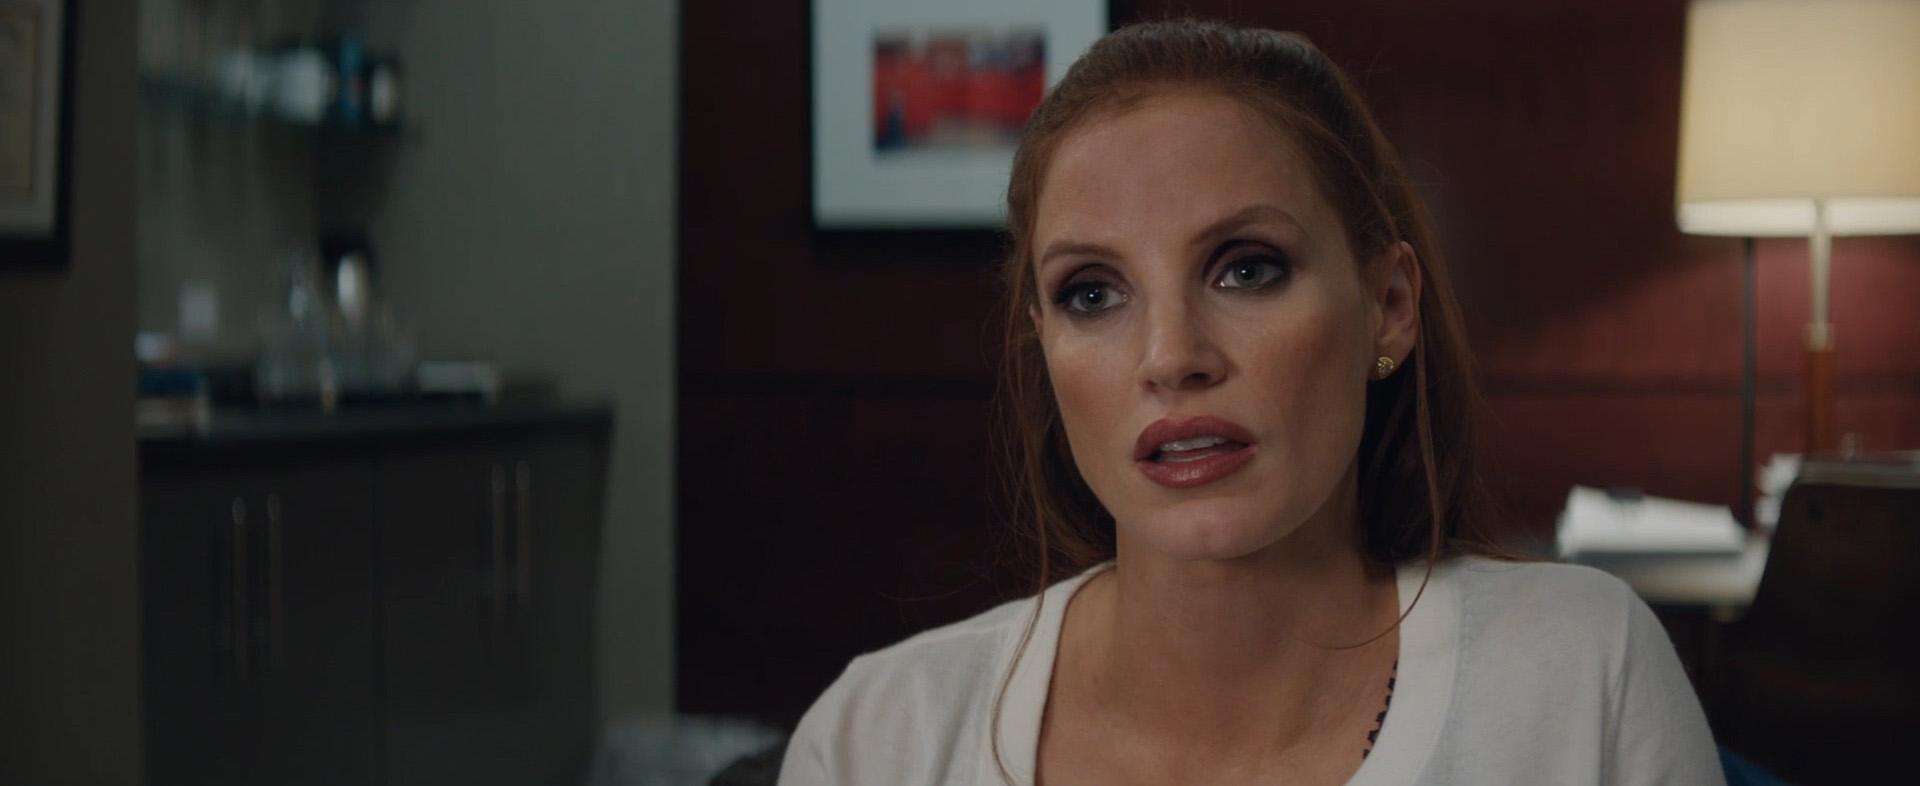 Molly's Game (2017) | Jessica Chastain in Molly's Game (2017)